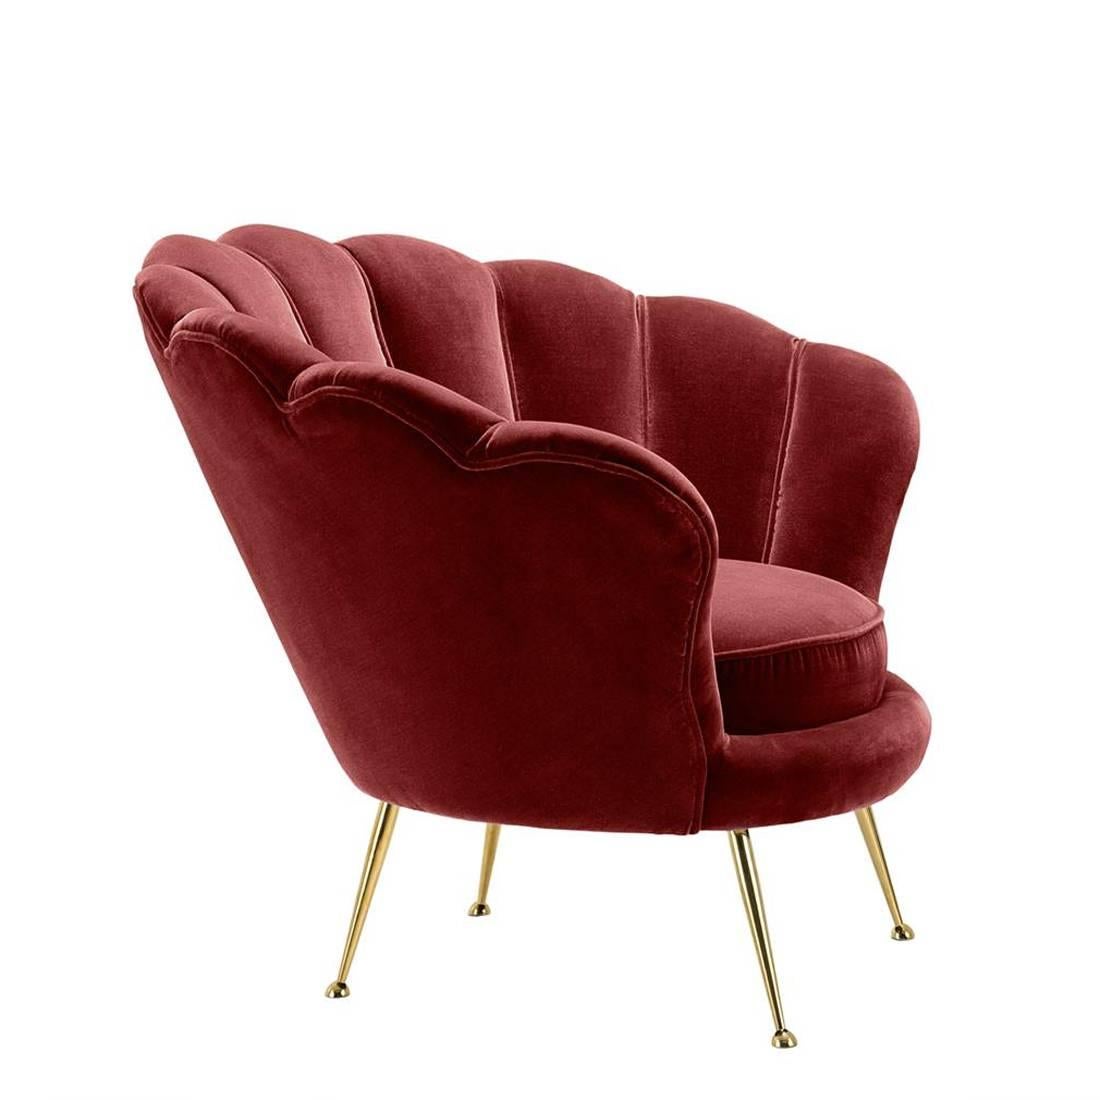 Armchair shell with structure in solid wood
and upholstered with red velvet. Fire retardant
treatment. With polished brass legs.
Also available with deep turquoise, or black,
or light green velvet fabric.
 